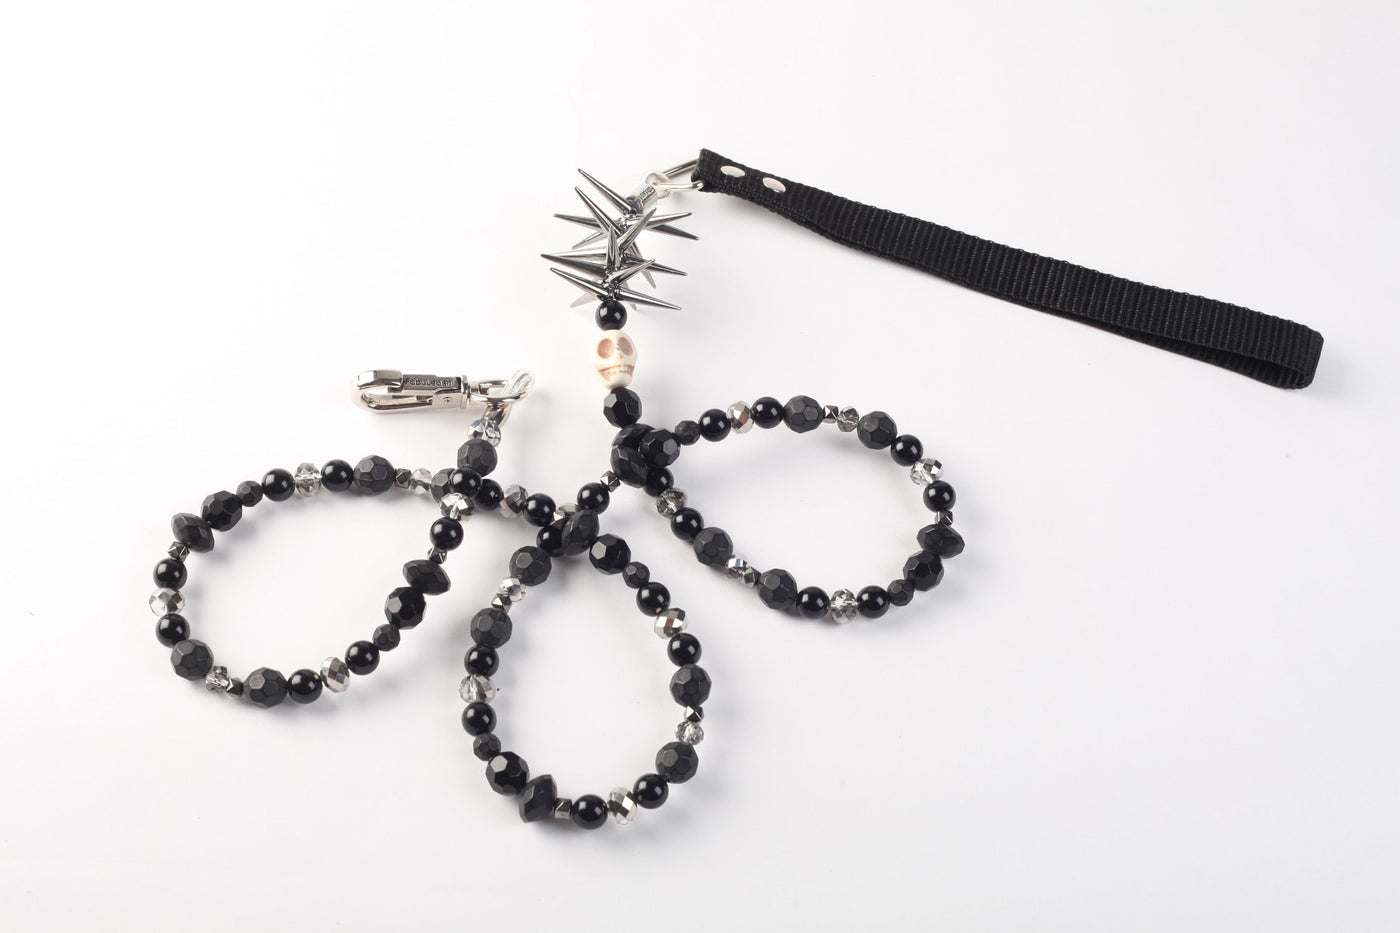 Skull Leash with Beads and Spikes